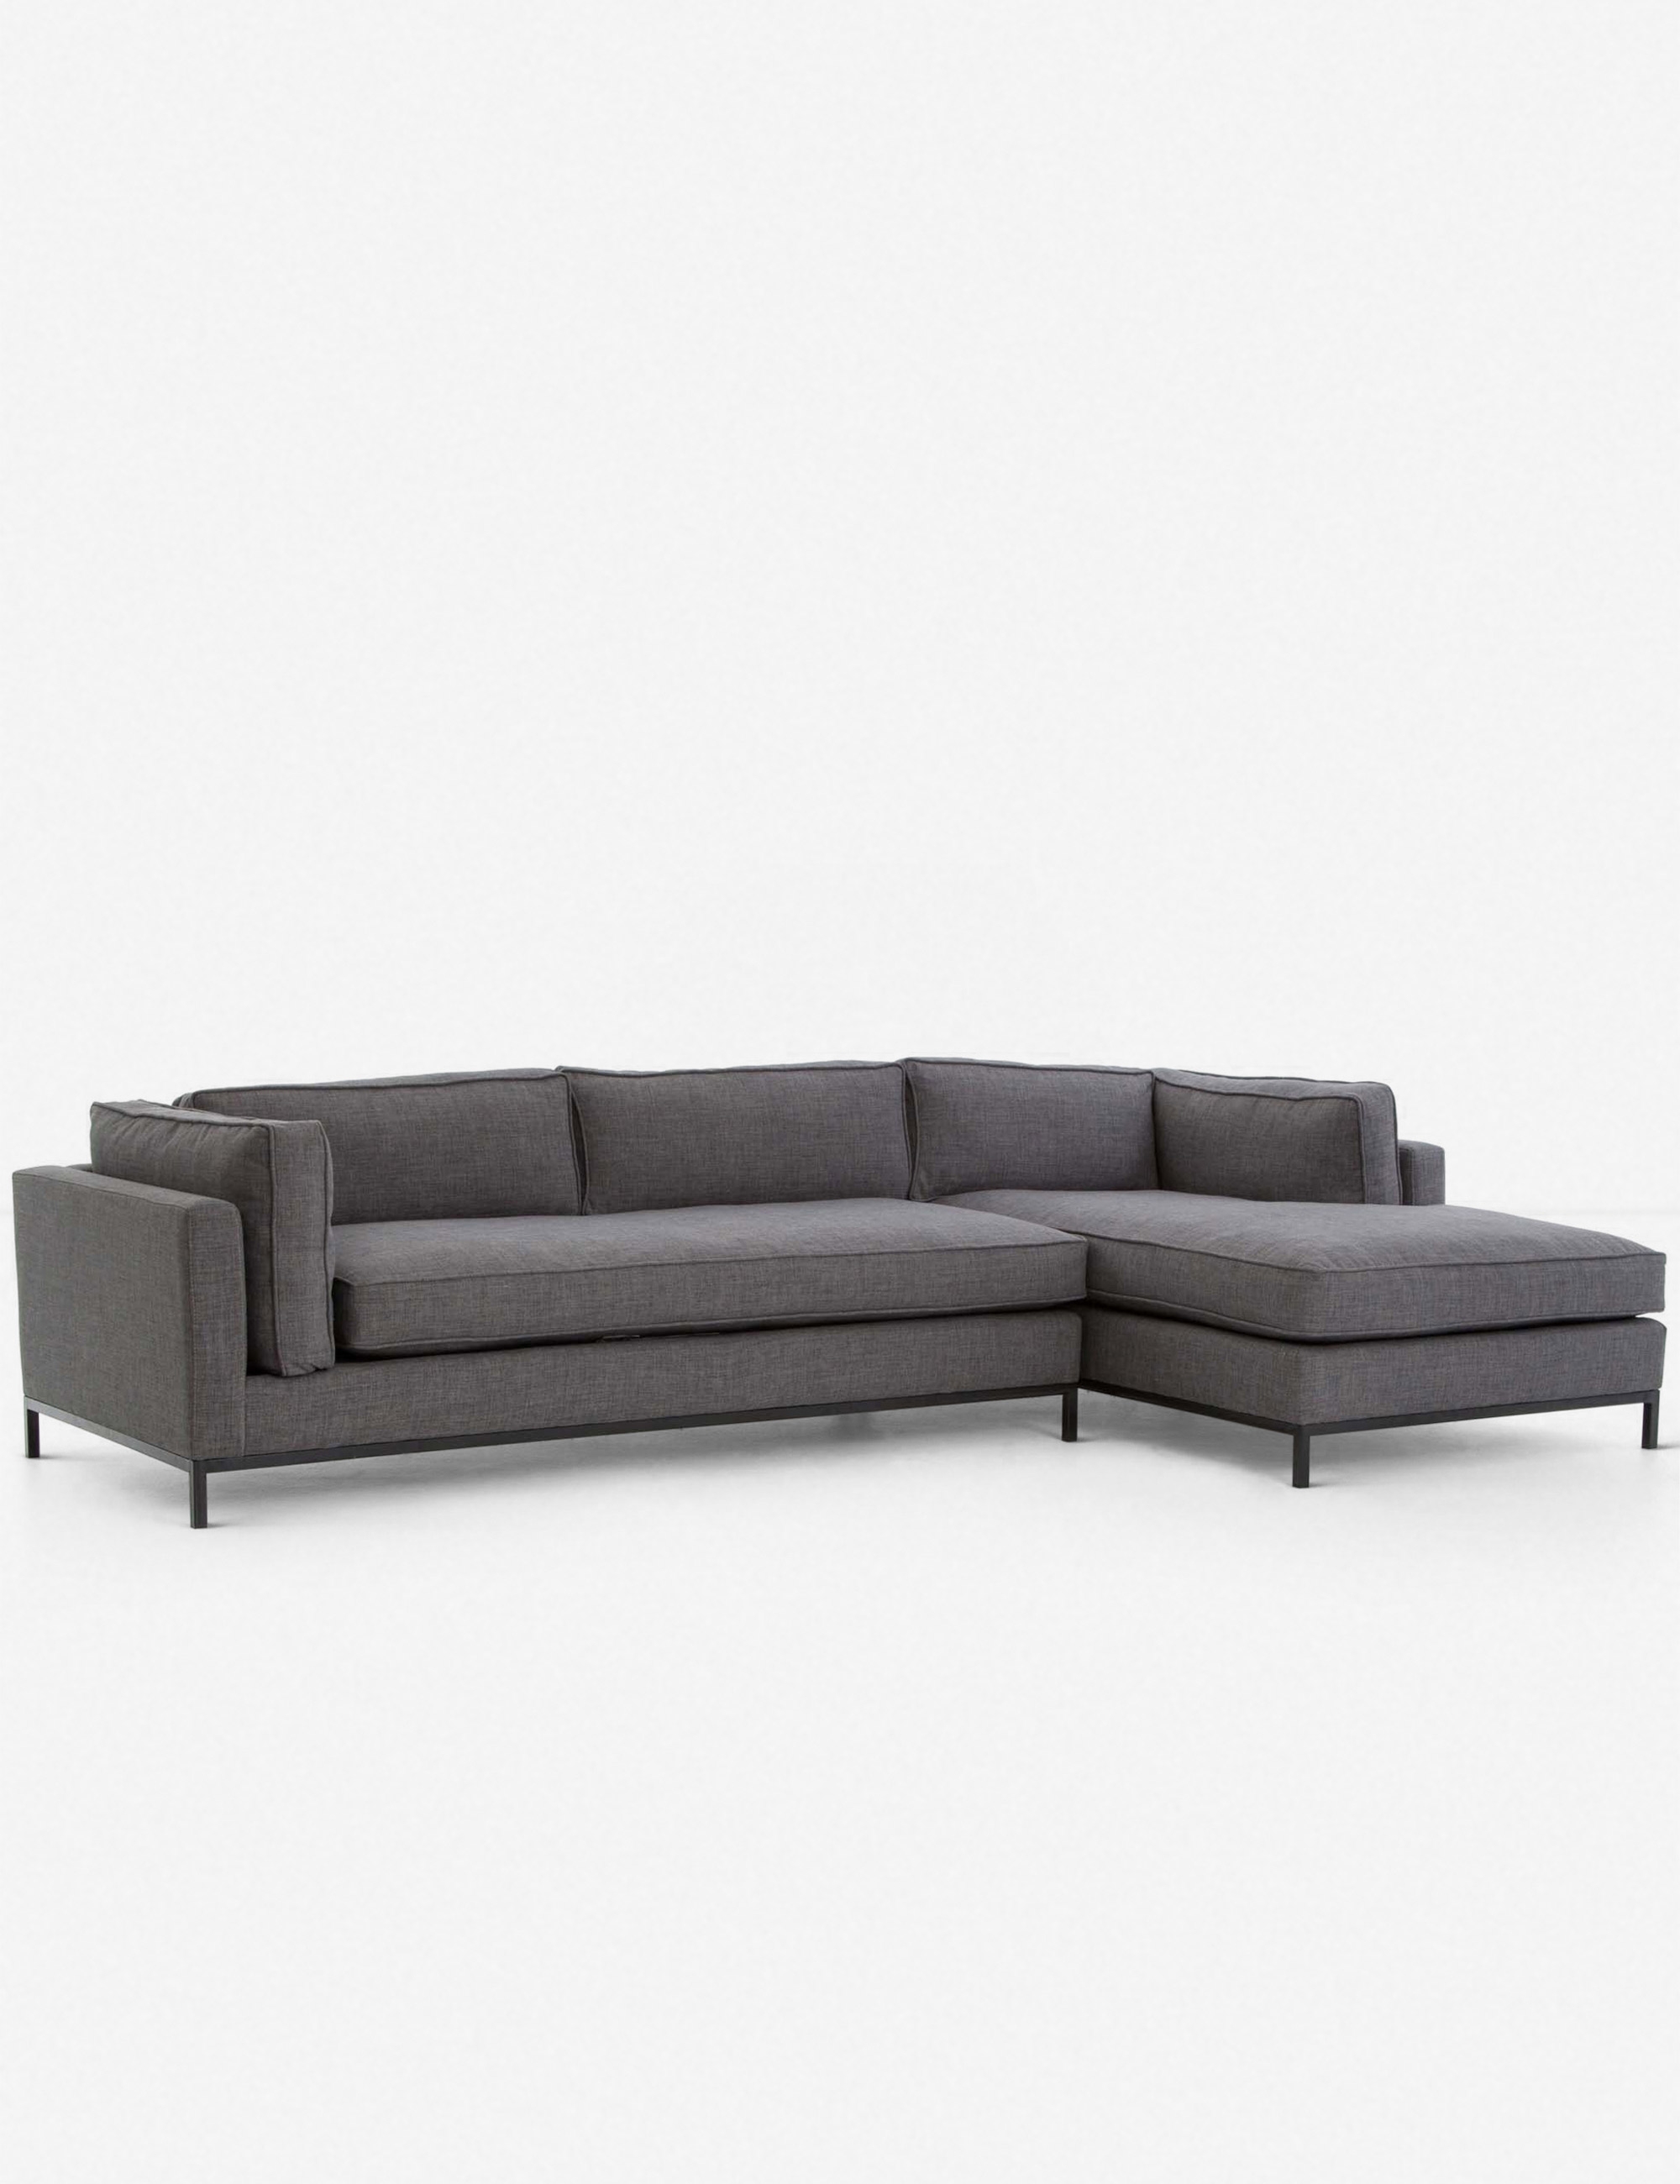 Fritzie Sectional Sofa - Image 5